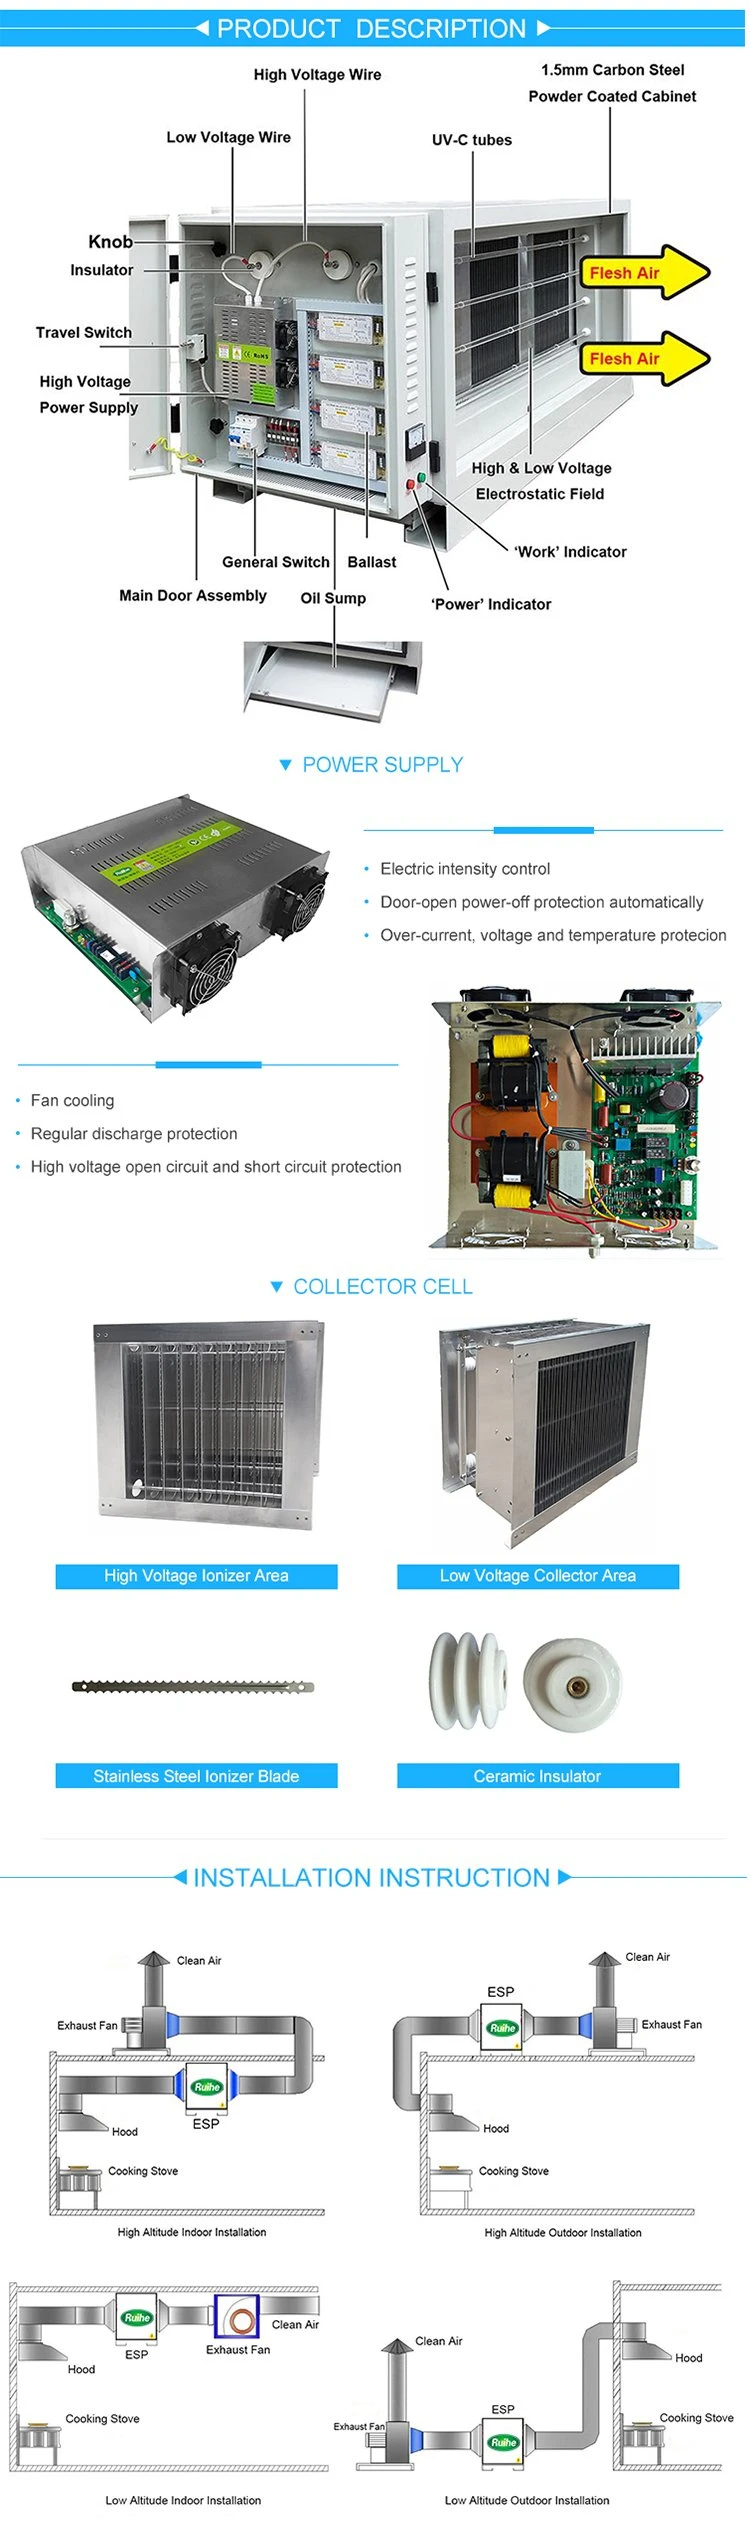 Dr Aire Over 98% Smoke Remove Air Pollution Control Equipment for Commercial Kitchen